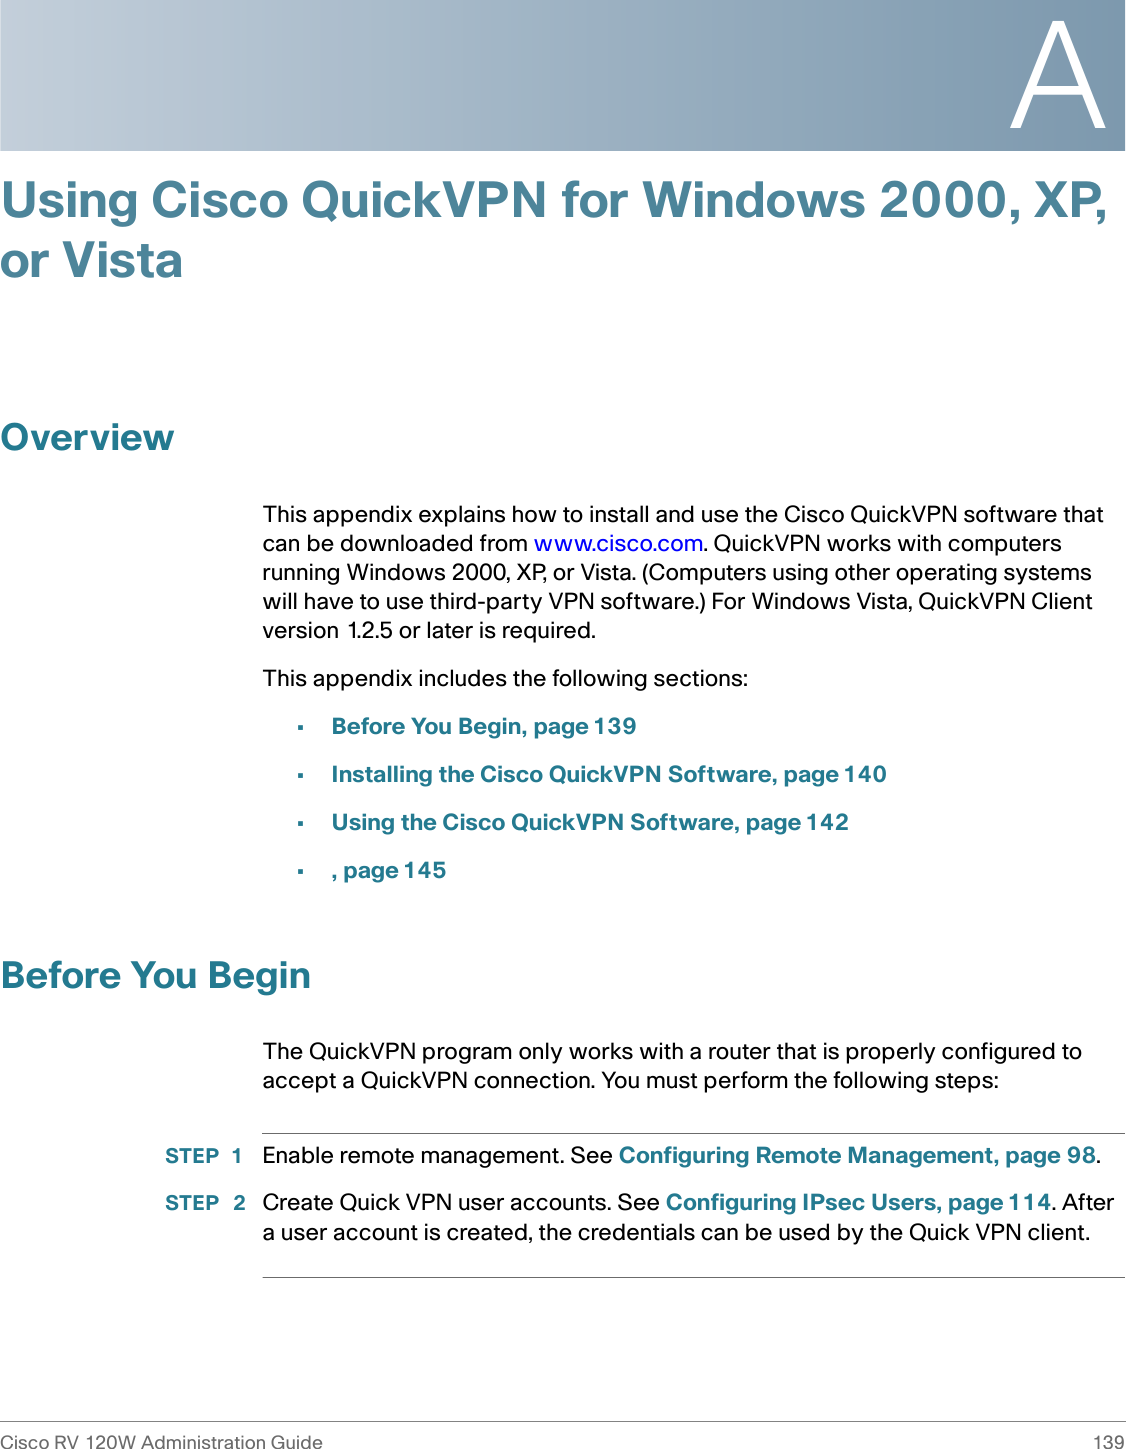 ACisco RV 120W Administration Guide 139 Using Cisco QuickVPN for Windows 2000, XP, or VistaOverviewThis appendix explains how to install and use the Cisco QuickVPN software that can be downloaded from www.cisco.com. QuickVPN works with computers running Windows 2000, XP, or Vista. (Computers using other operating systems will have to use third-party VPN software.) For Windows Vista, QuickVPN Client version 1.2.5 or later is required. This appendix includes the following sections:•Before You Begin, page139•Installing the Cisco QuickVPN Software, page 140•Using the Cisco QuickVPN Software, page 142•, page 145Before You BeginThe QuickVPN program only works with a router that is properly configured to accept a QuickVPN connection. You must perform the following steps:STEP 1 Enable remote management. See Configuring Remote Management, page 98.STEP  2 Create Quick VPN user accounts. See Configuring IPsec Users, page 114. After a user account is created, the credentials can be used by the Quick VPN client.